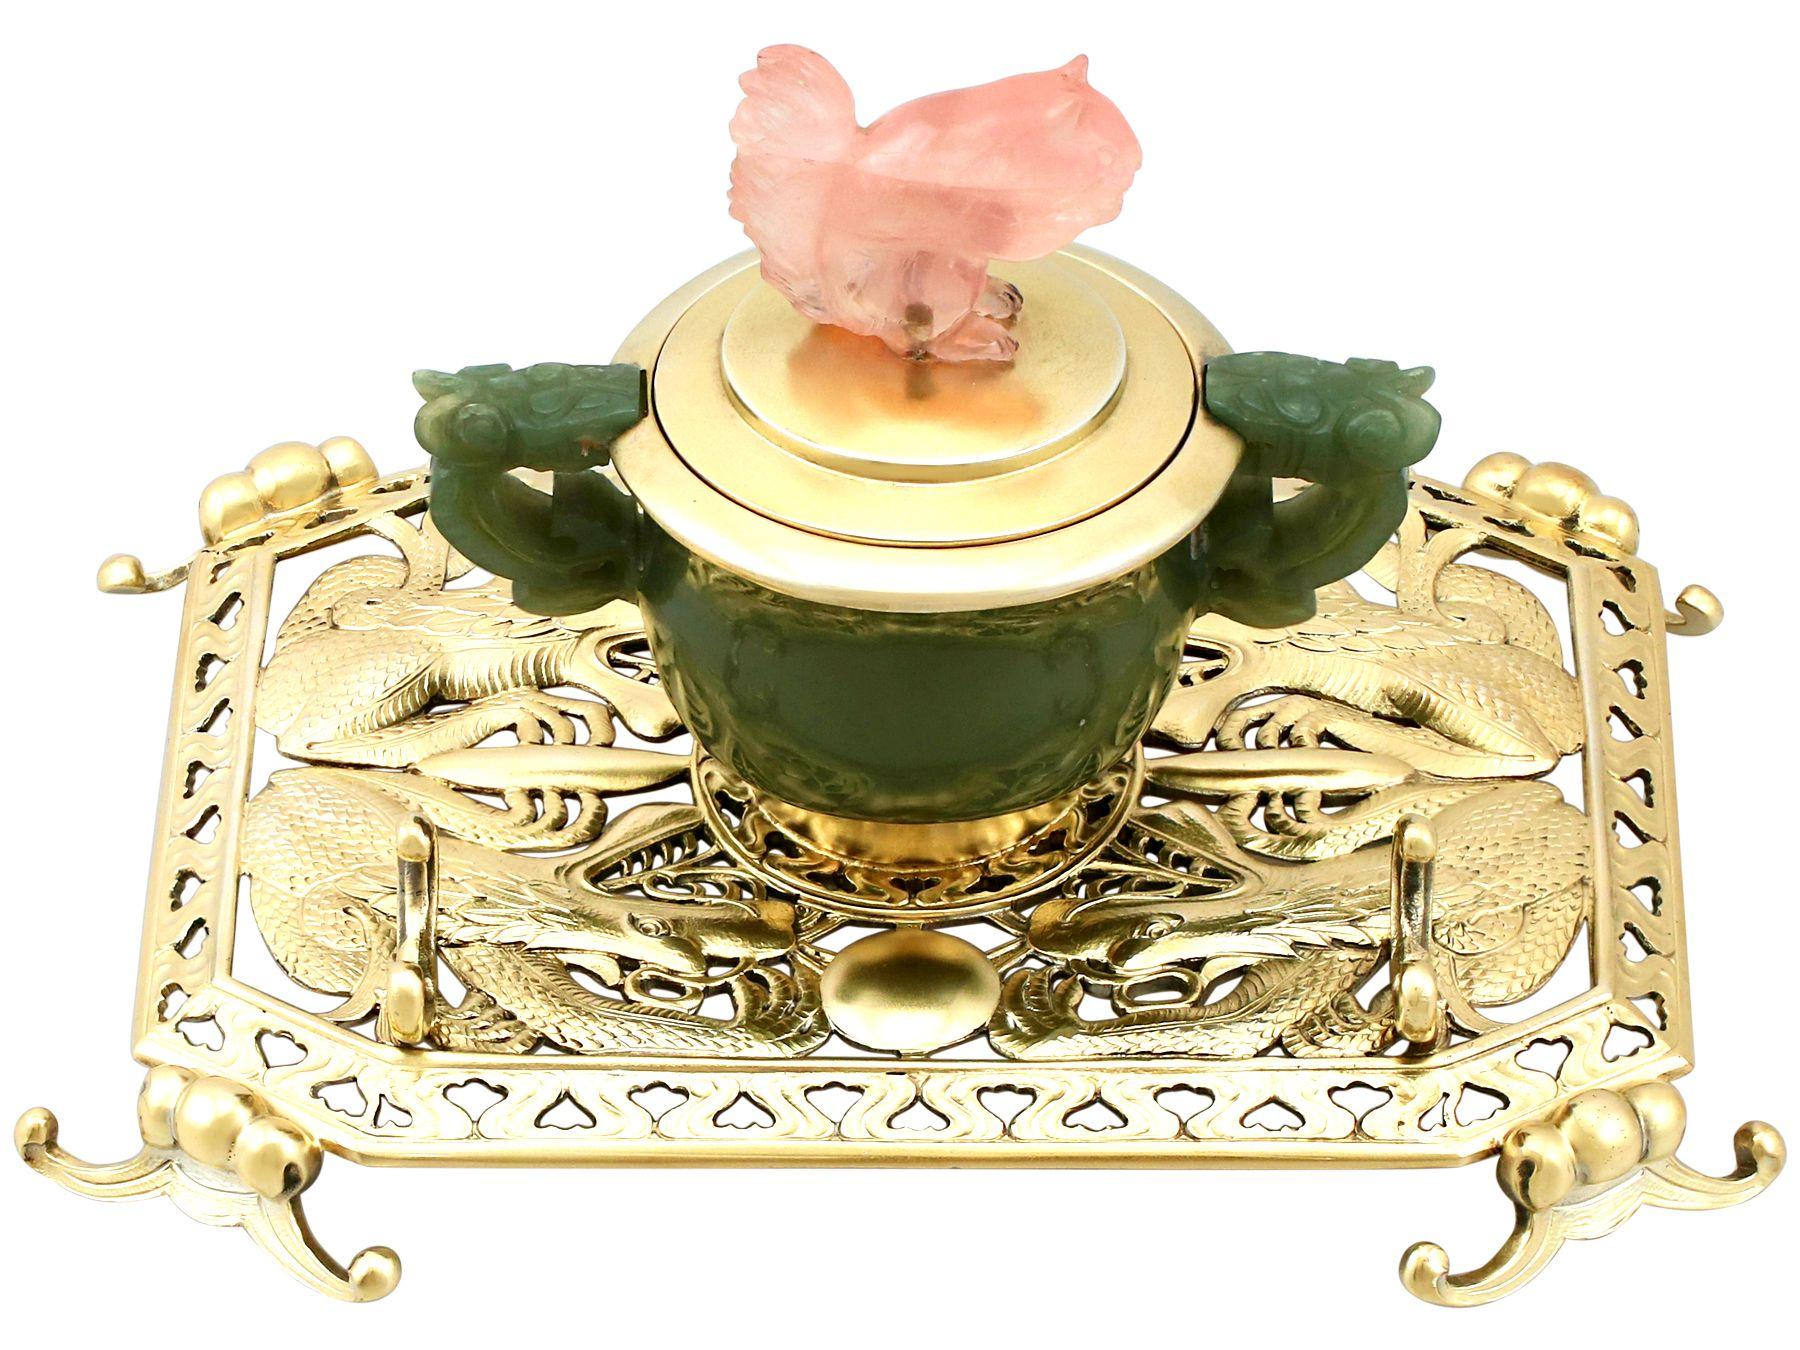 An exceptional, fine and impressive, unusual antique George V English sterling silver, nephrite and rose quartz inkstand; an addition to our ornamental silverware collection.

This exceptional antique sterling silver gilt inkstand has a